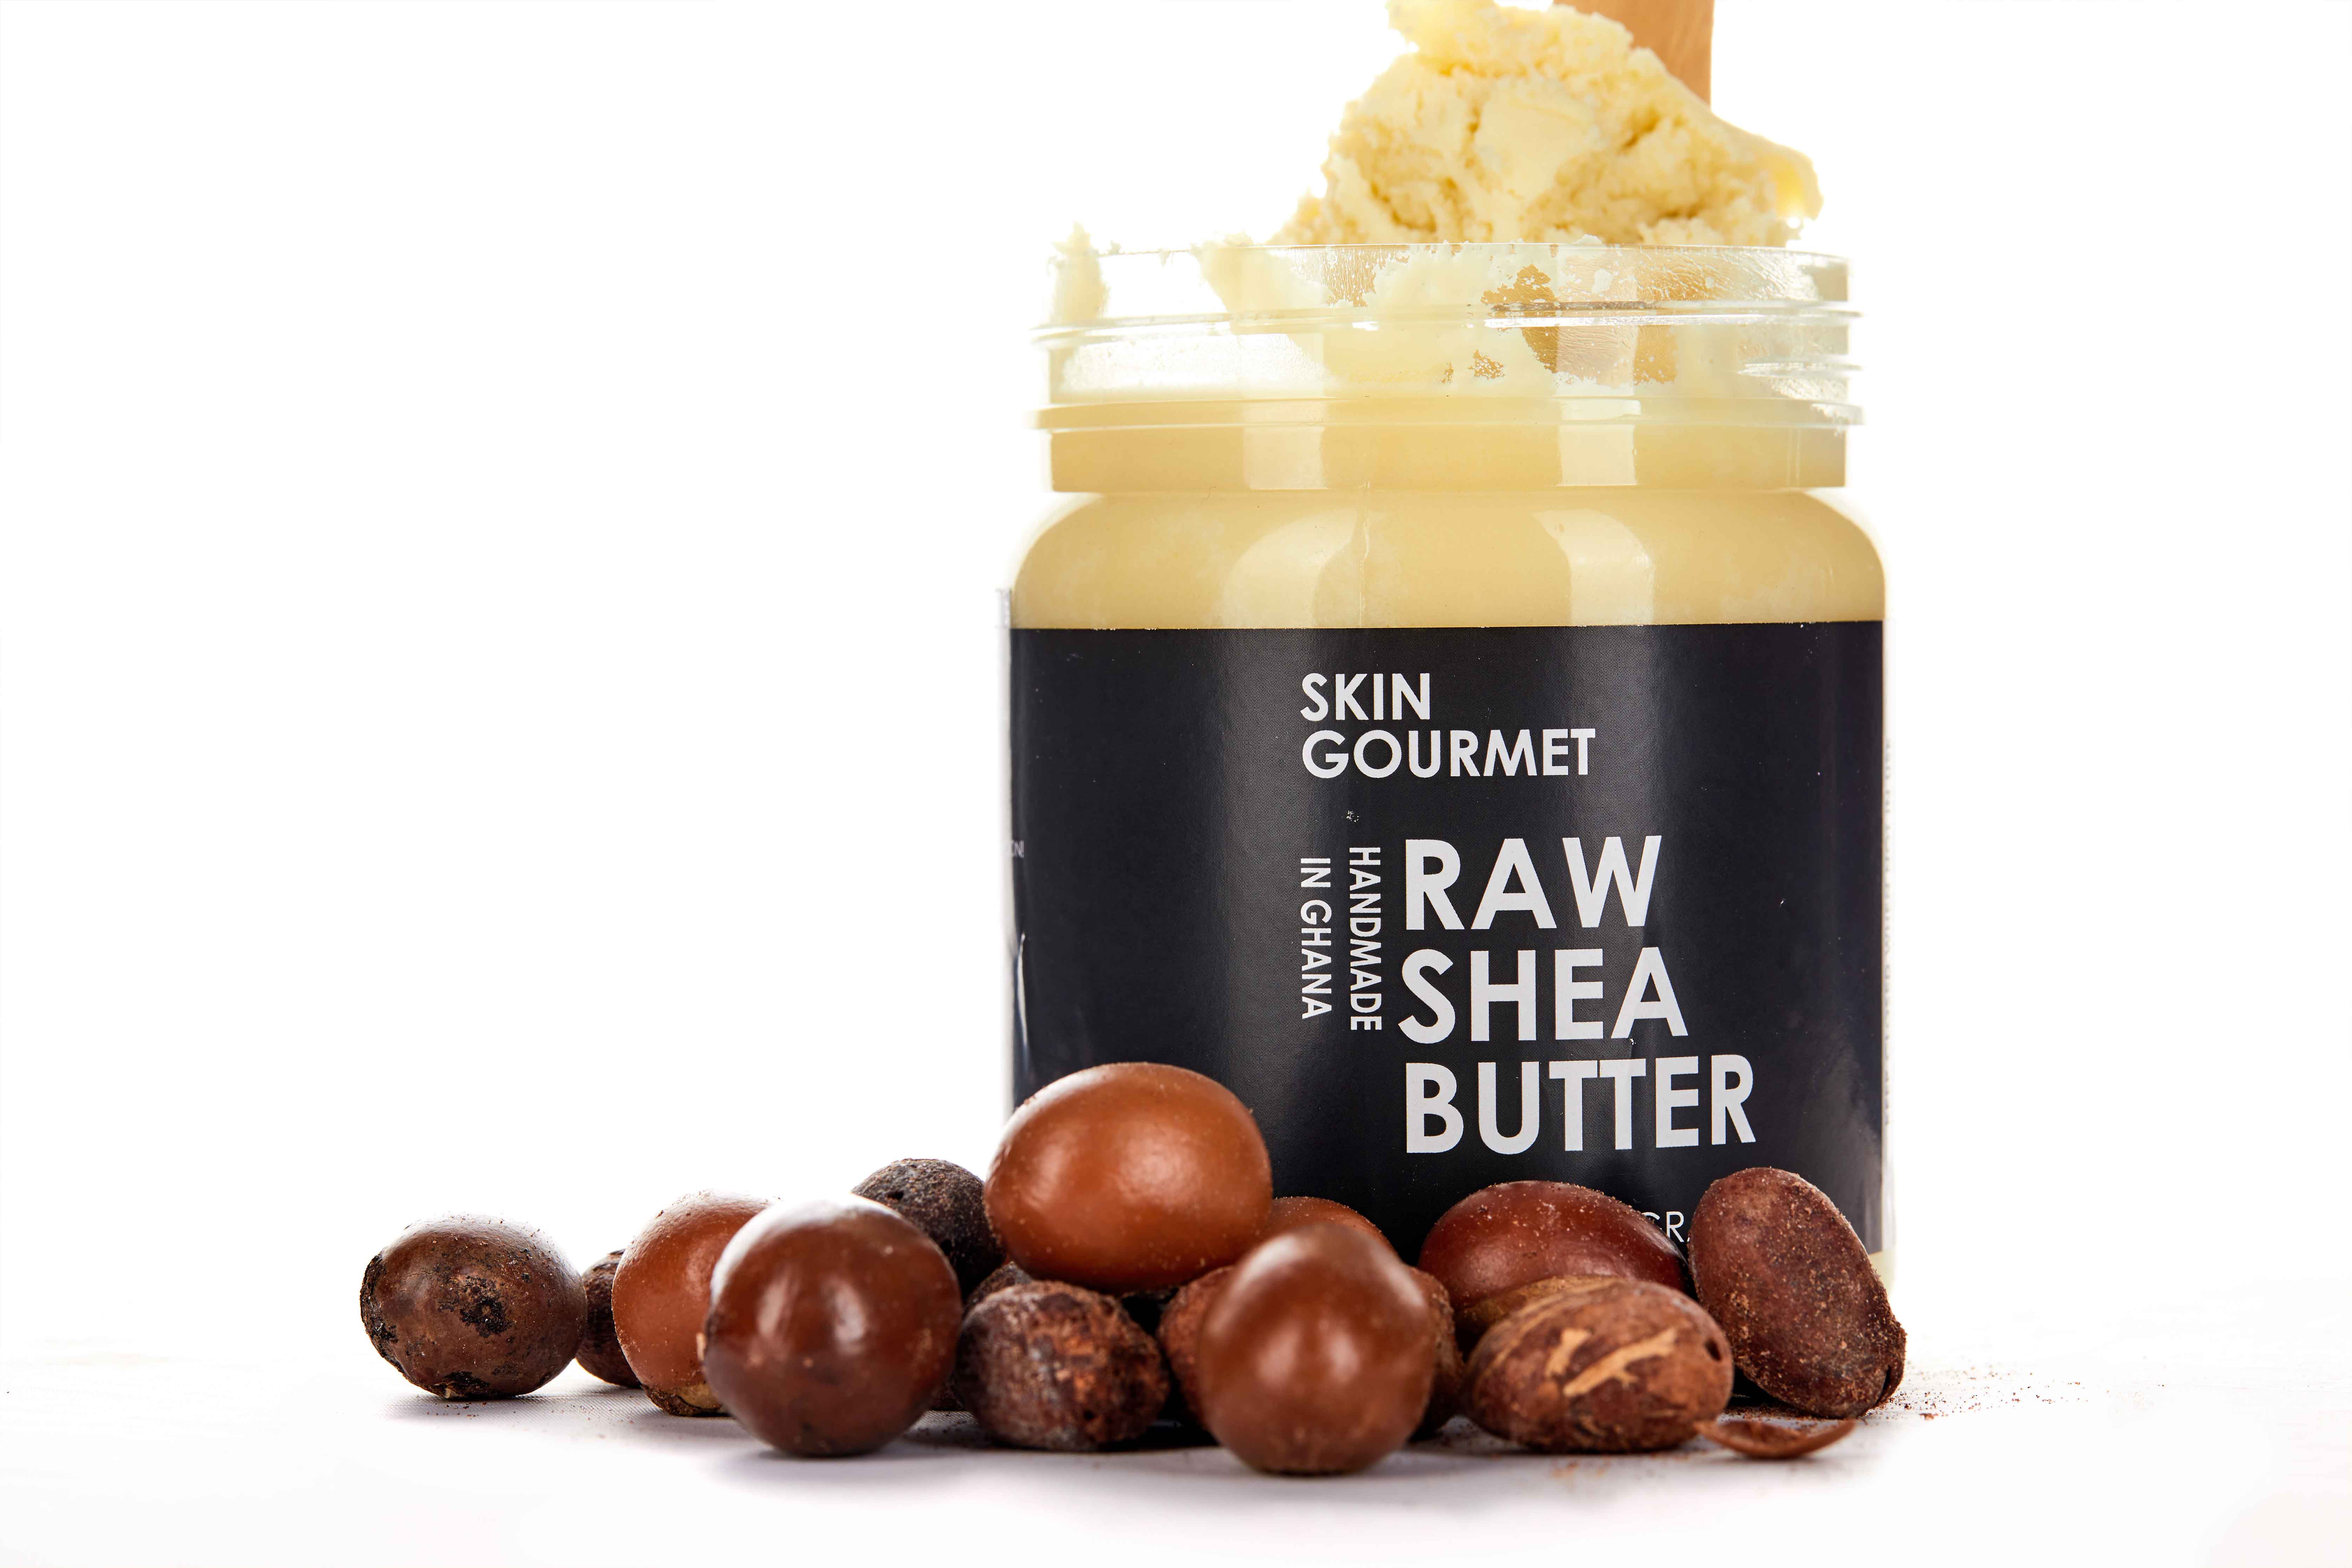 Why Shea Butter Might Be Great For You